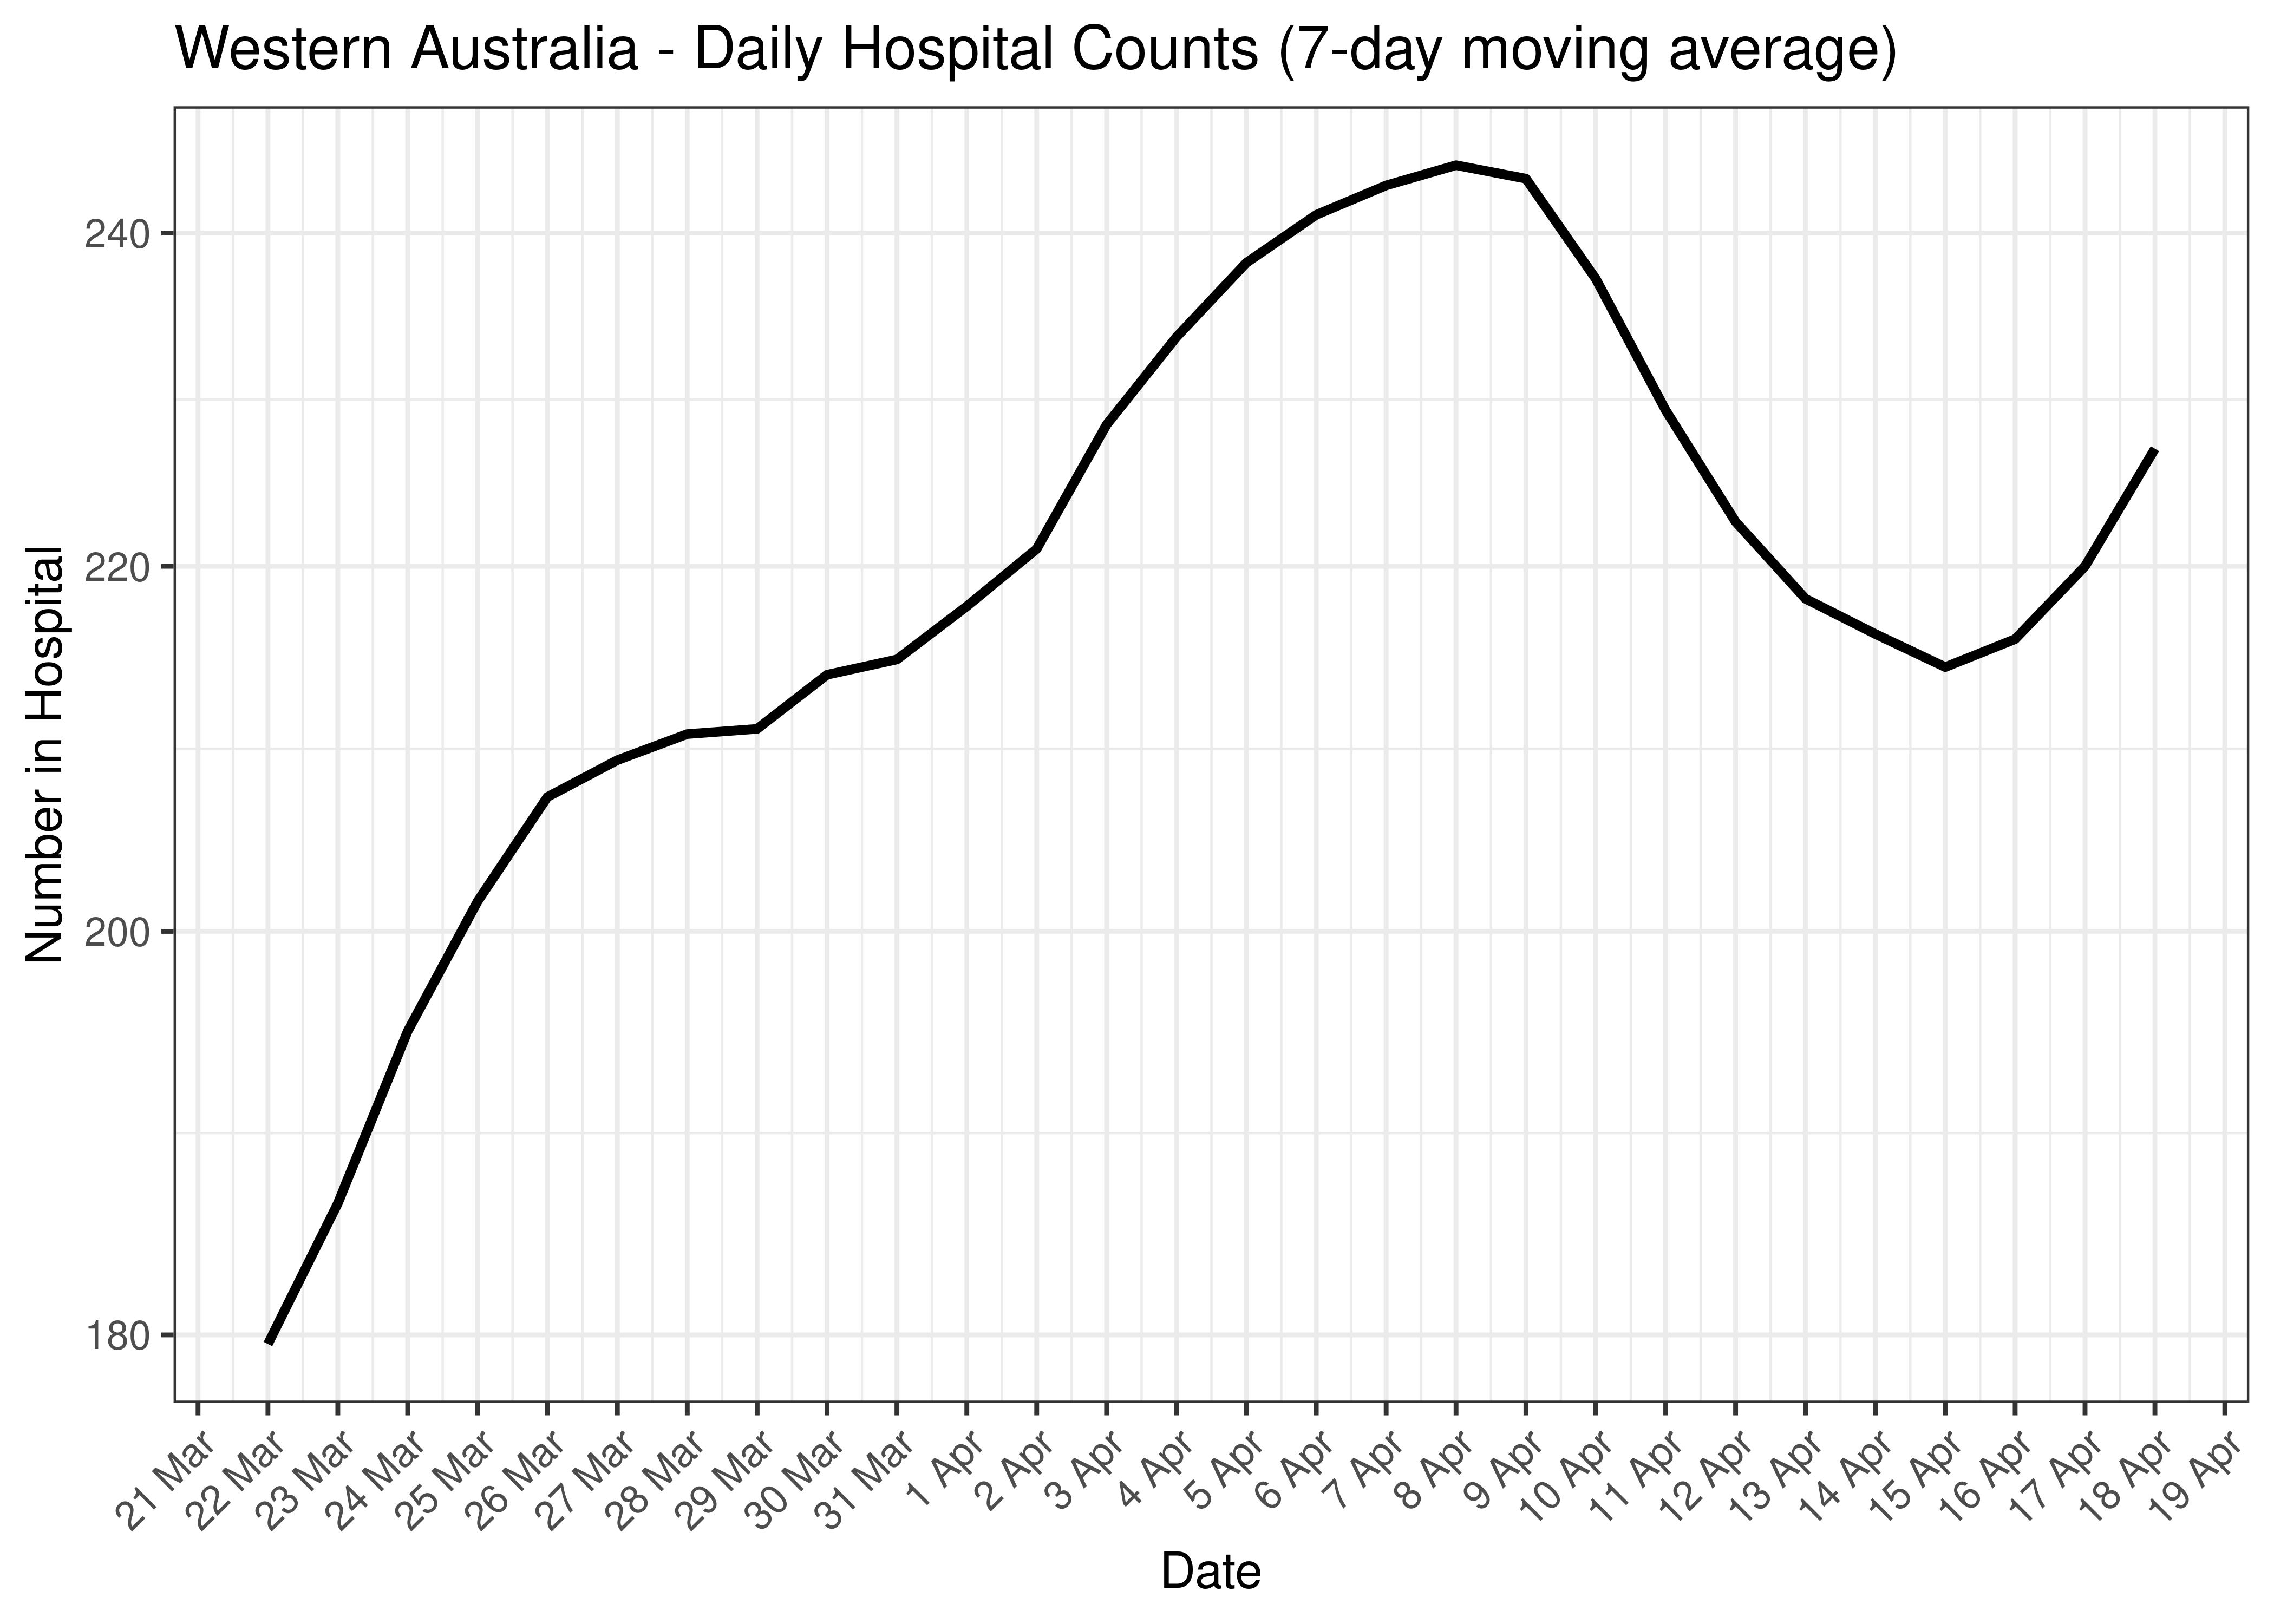 Western Australia - Daily Hospital Counts for Last 30-days (7-day moving average)